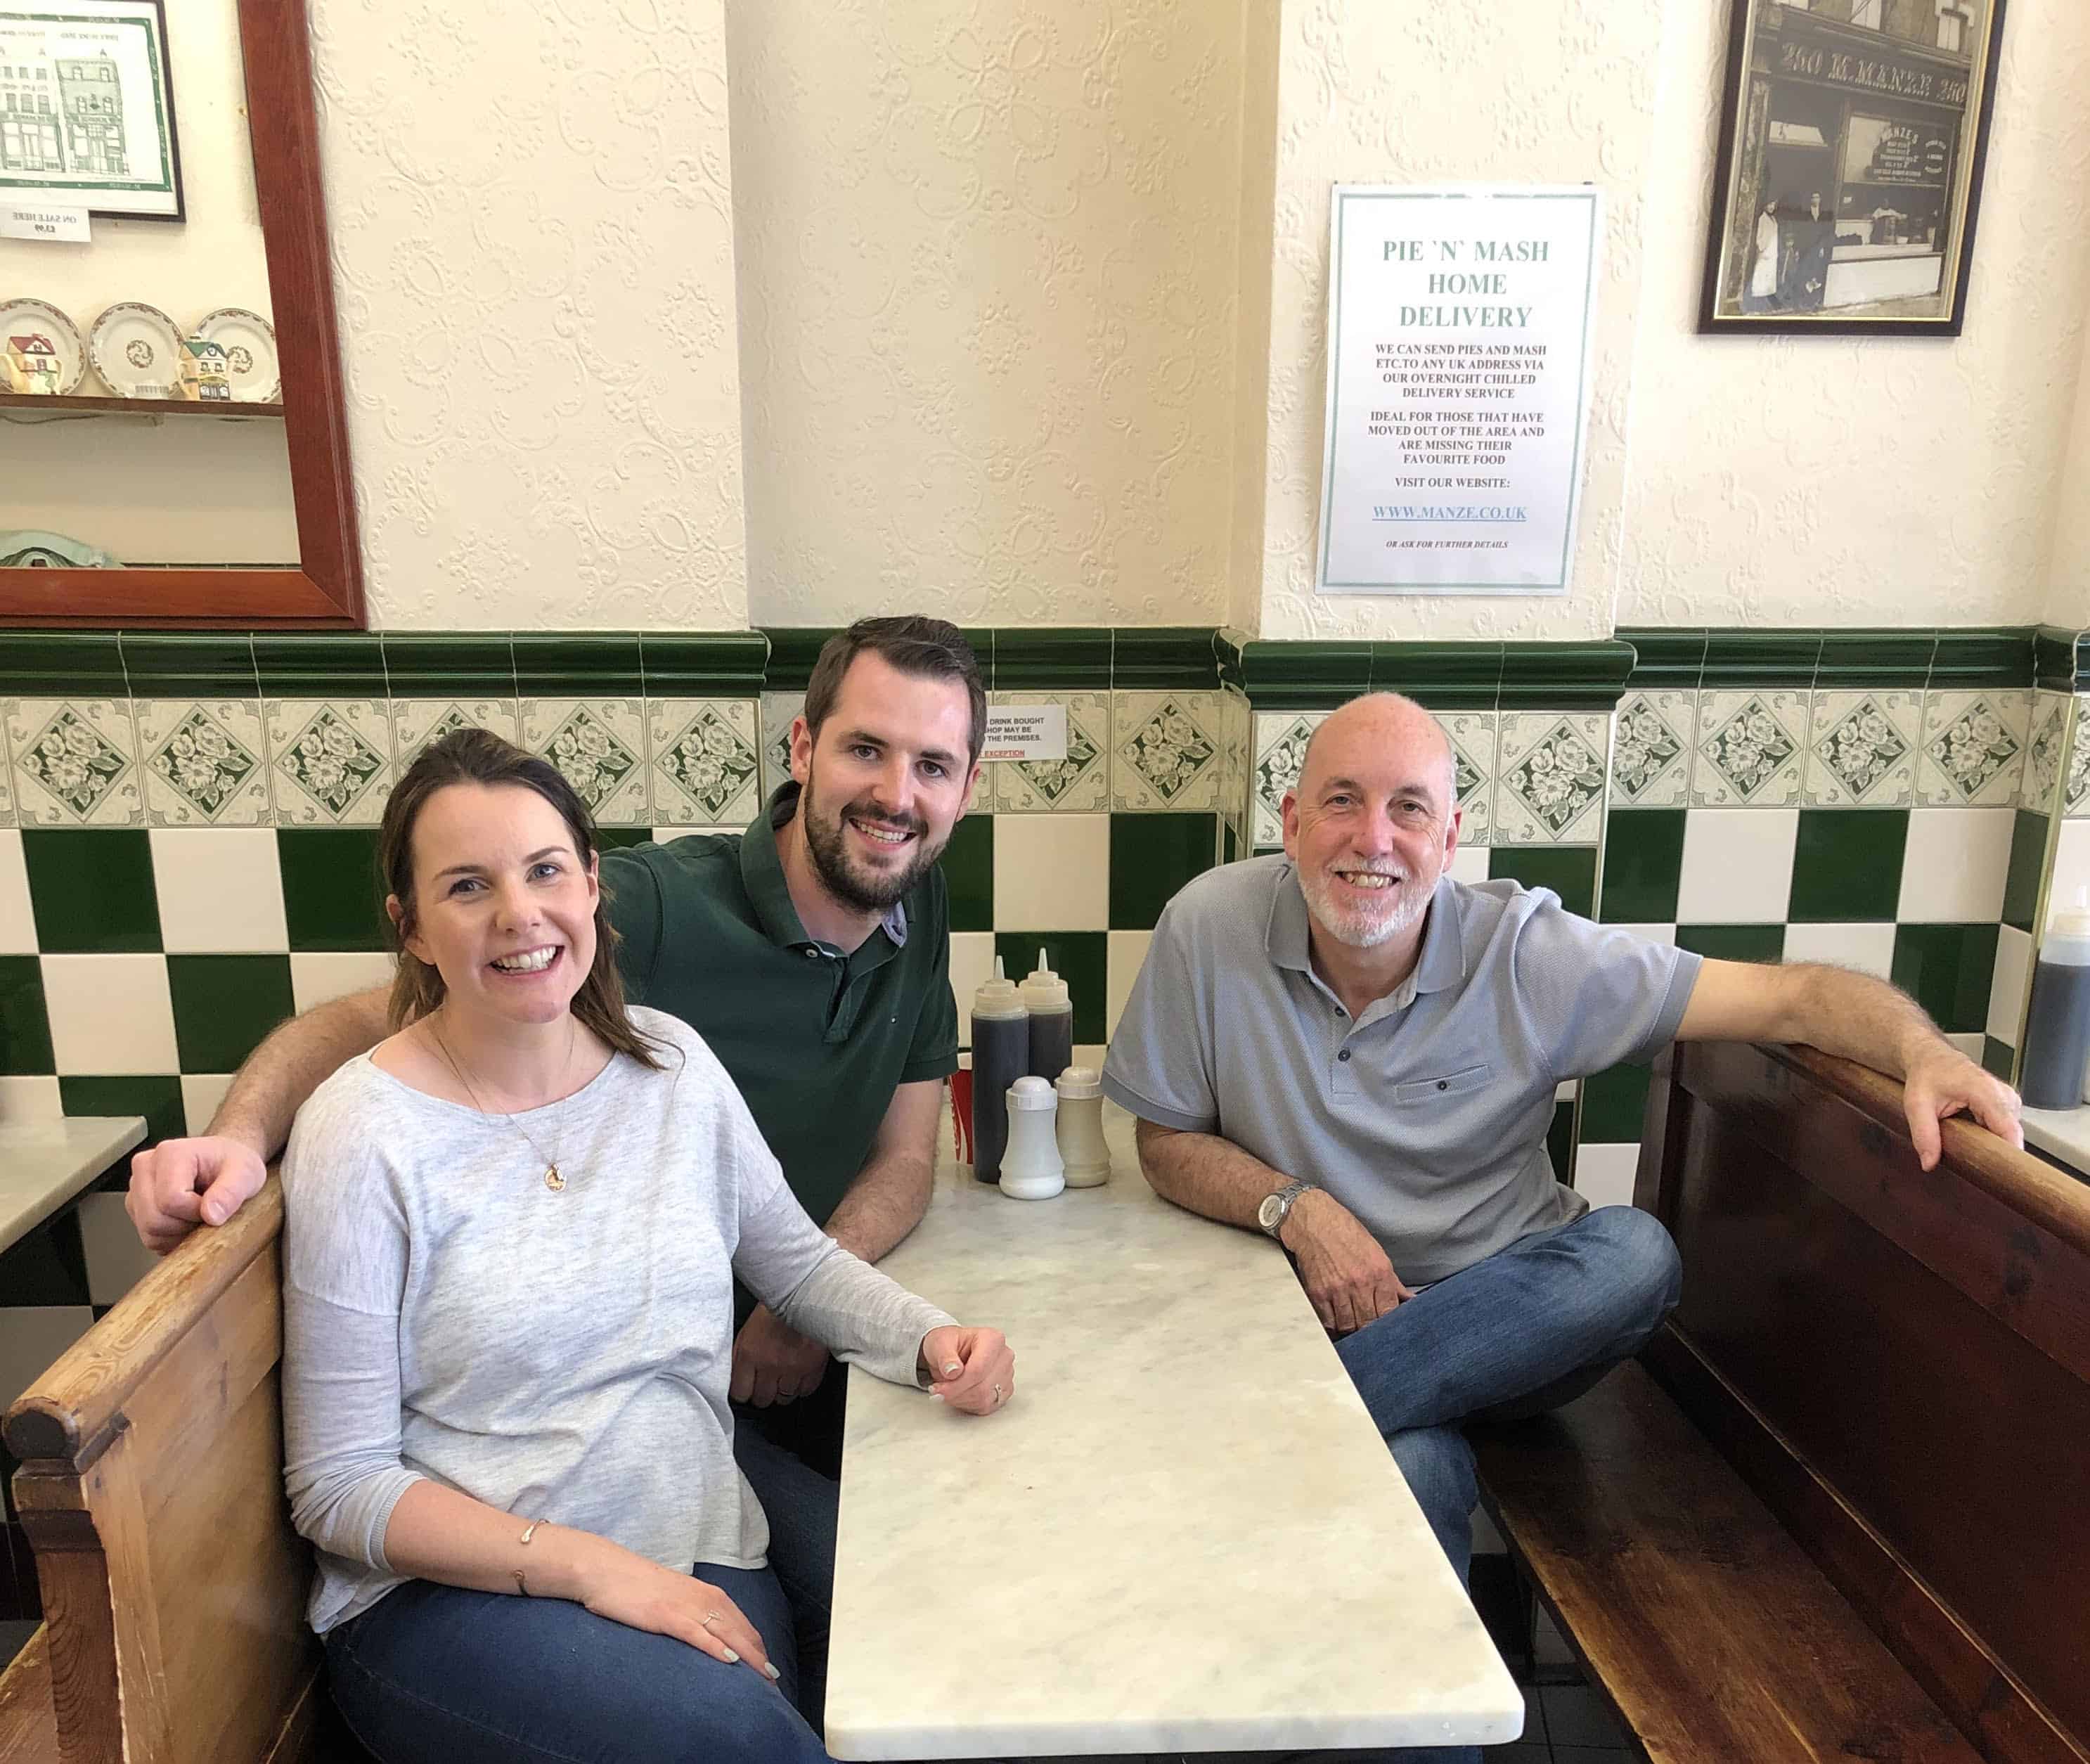 FromL-R: Emma, Tom and Rick at the popular Pie and Mash shop